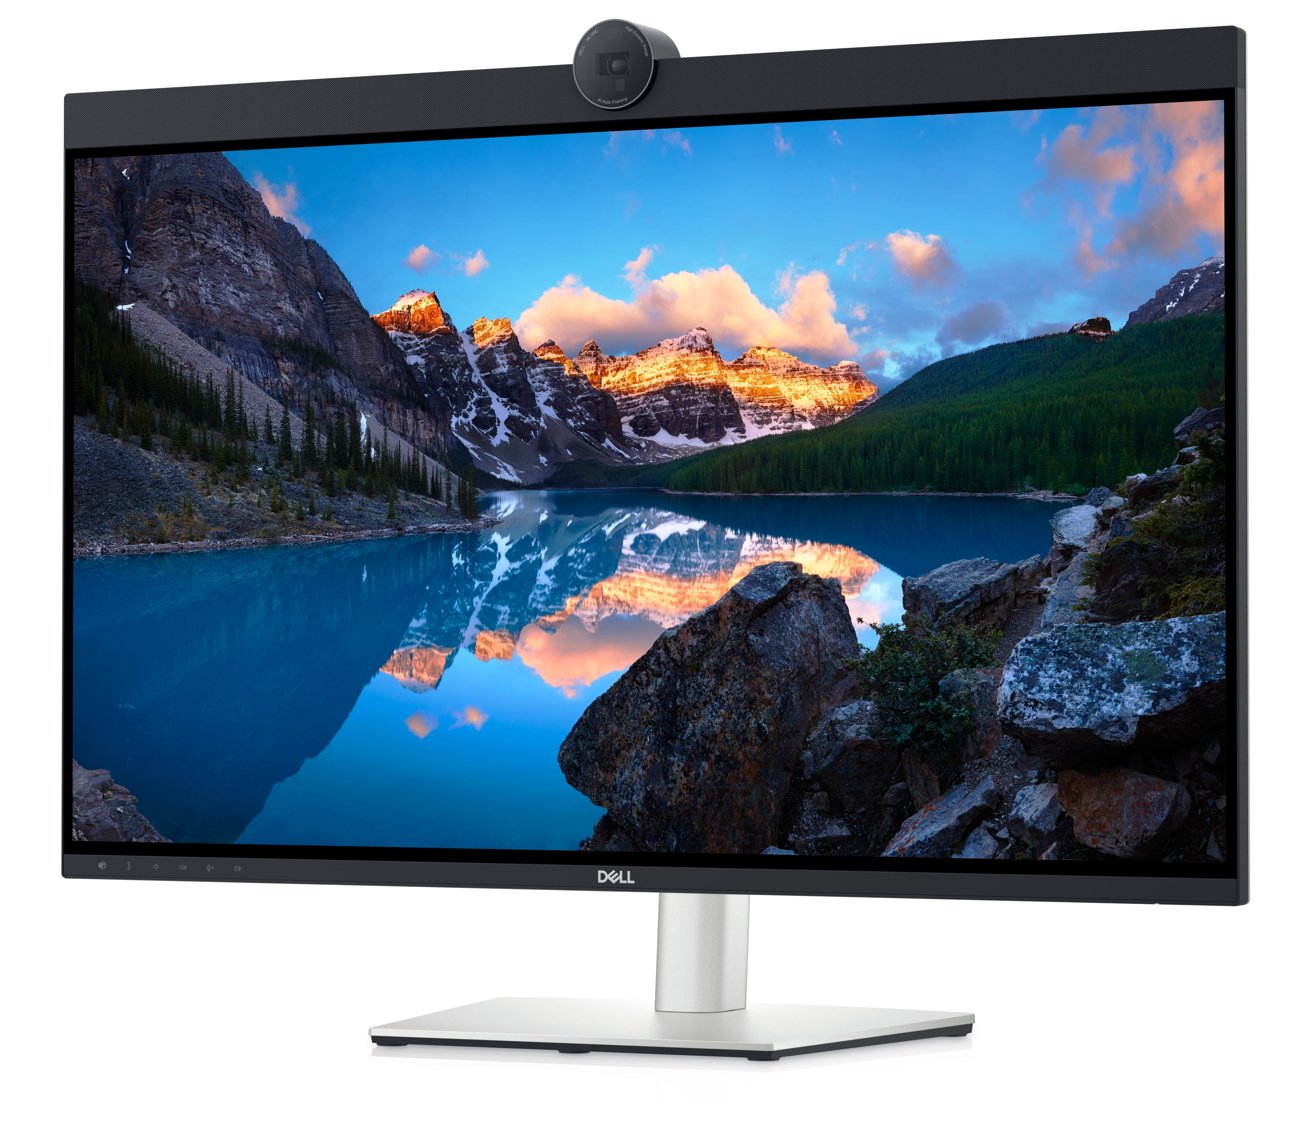 Dell's monitor has a large bezel section at the top, along with a circular camera hump. 